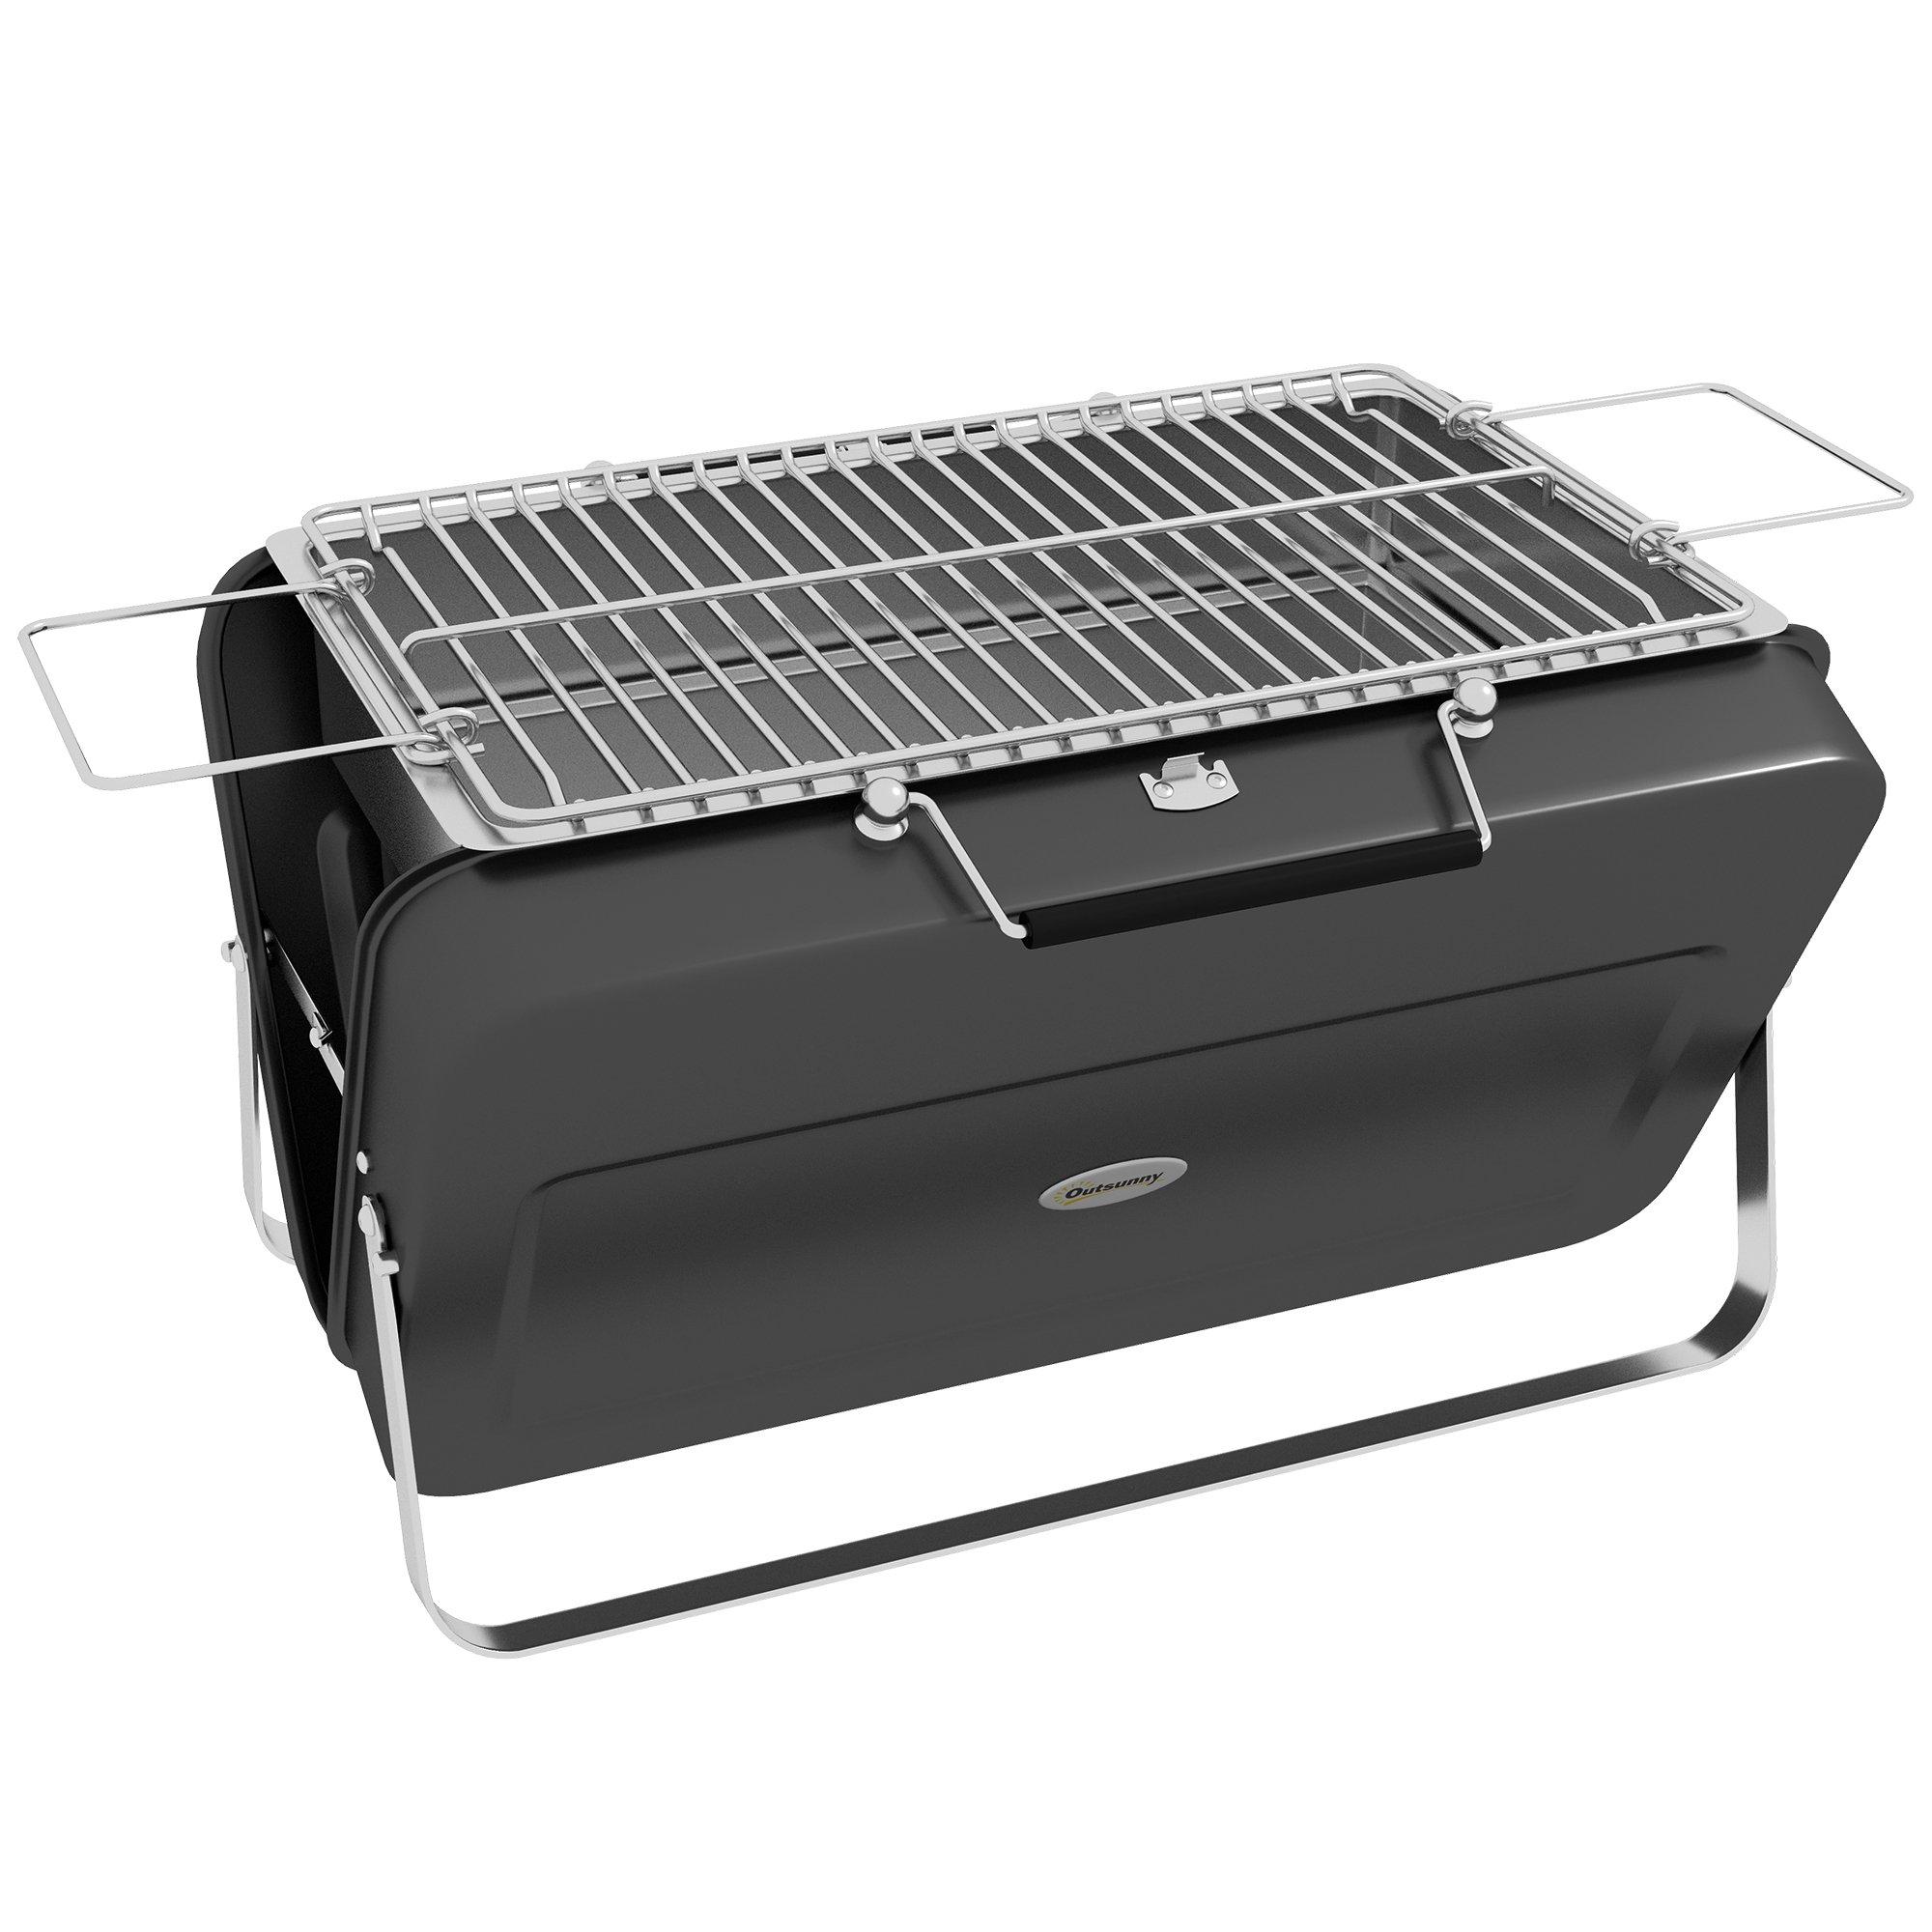 Mini Charcoal Barbecue Grill Foldable BBQ for Tabletop Camping Picnic